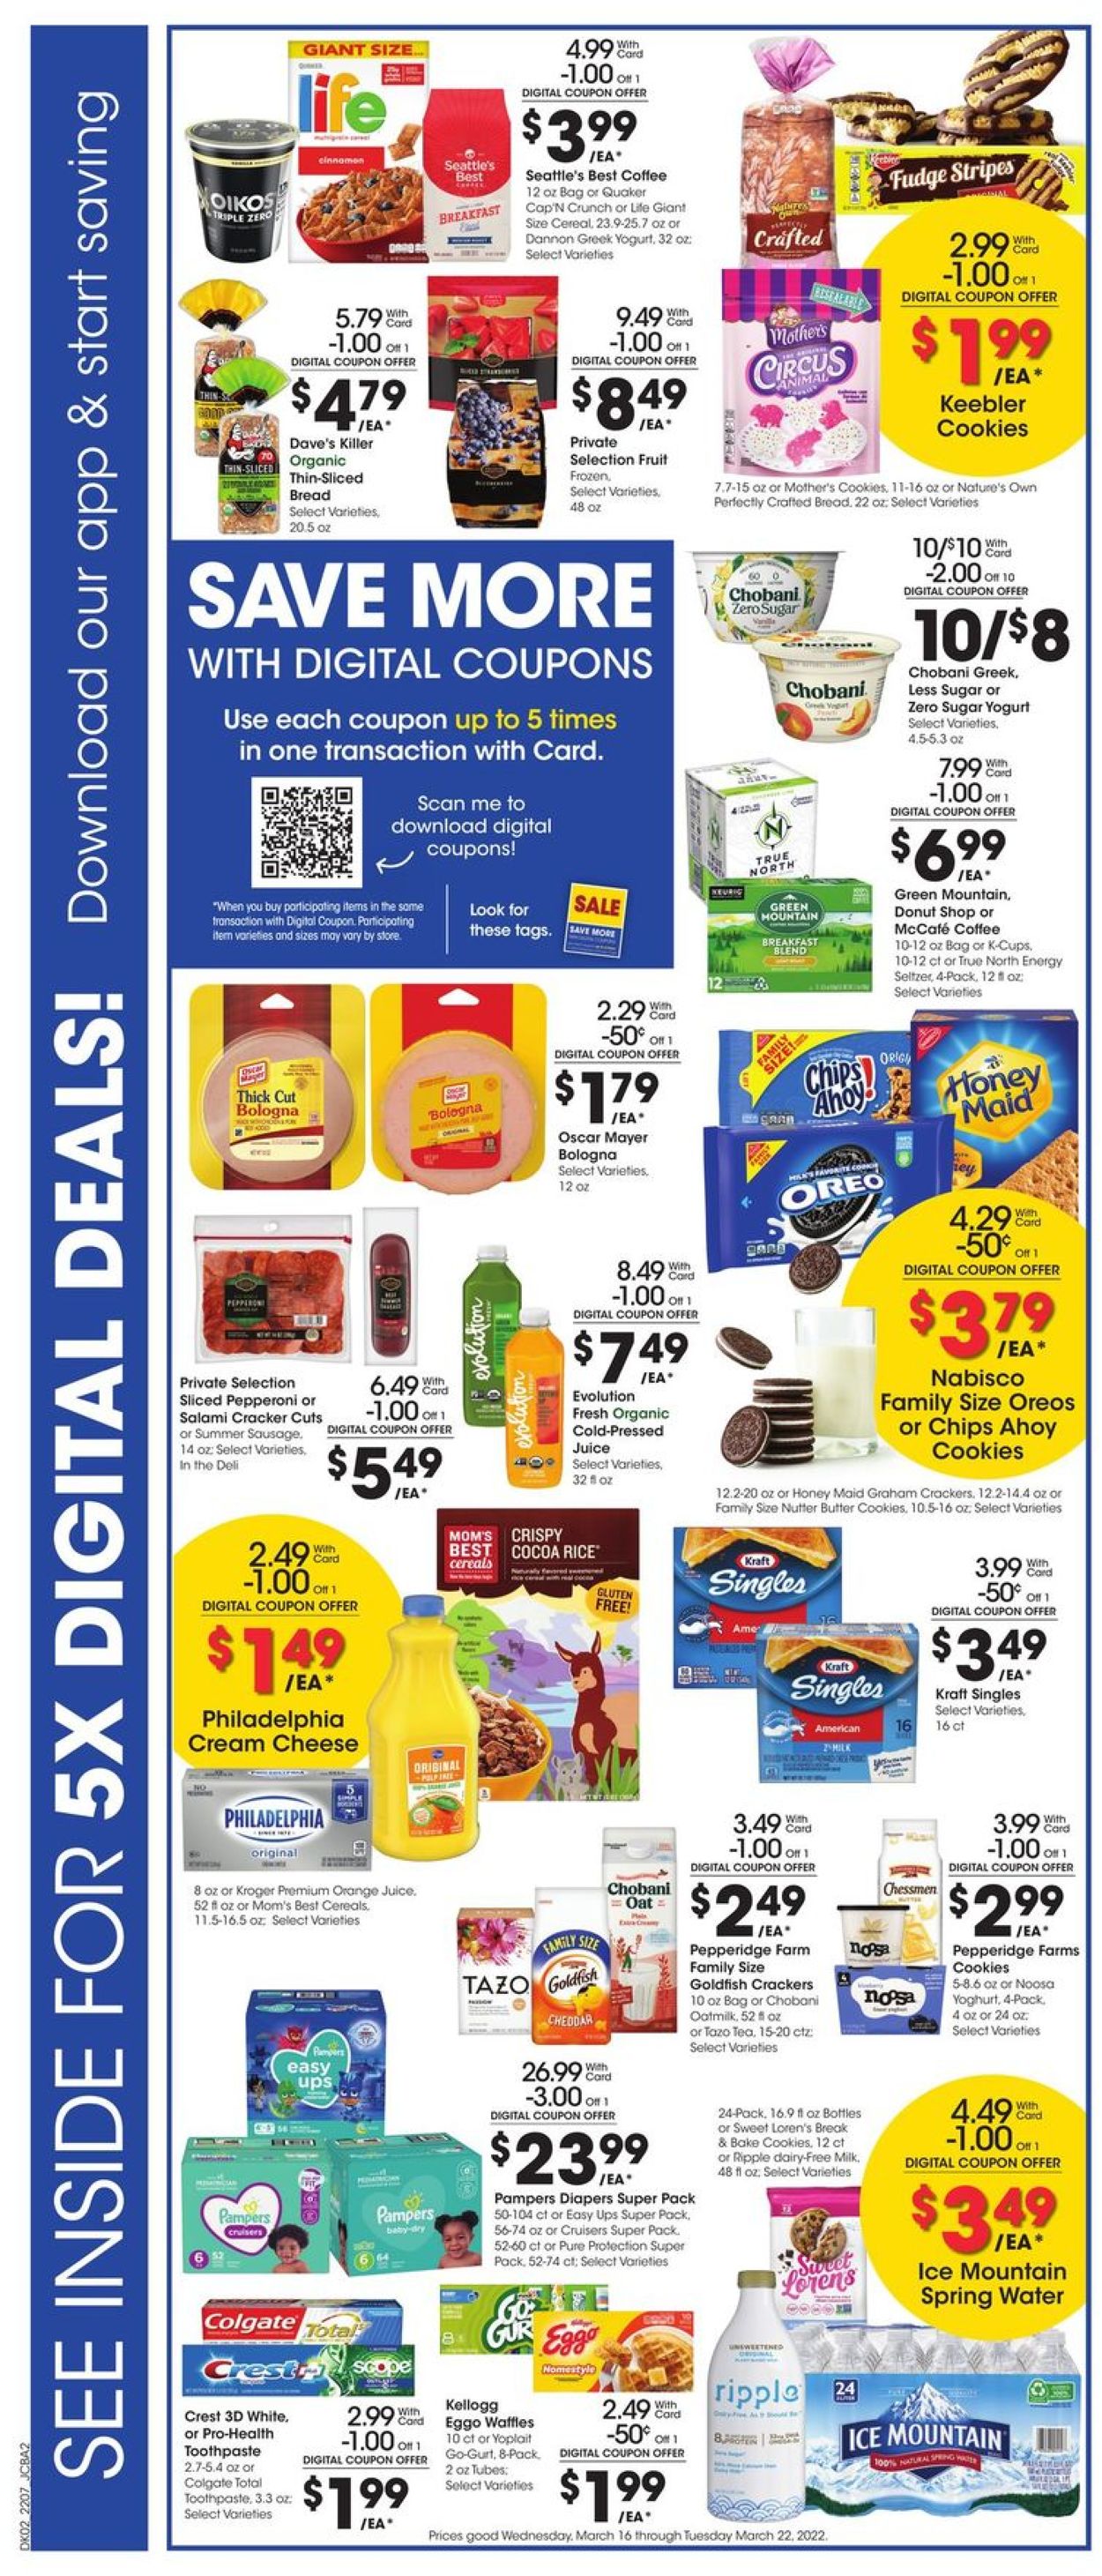 Catalogue Jay C Food Stores from 03/16/2022